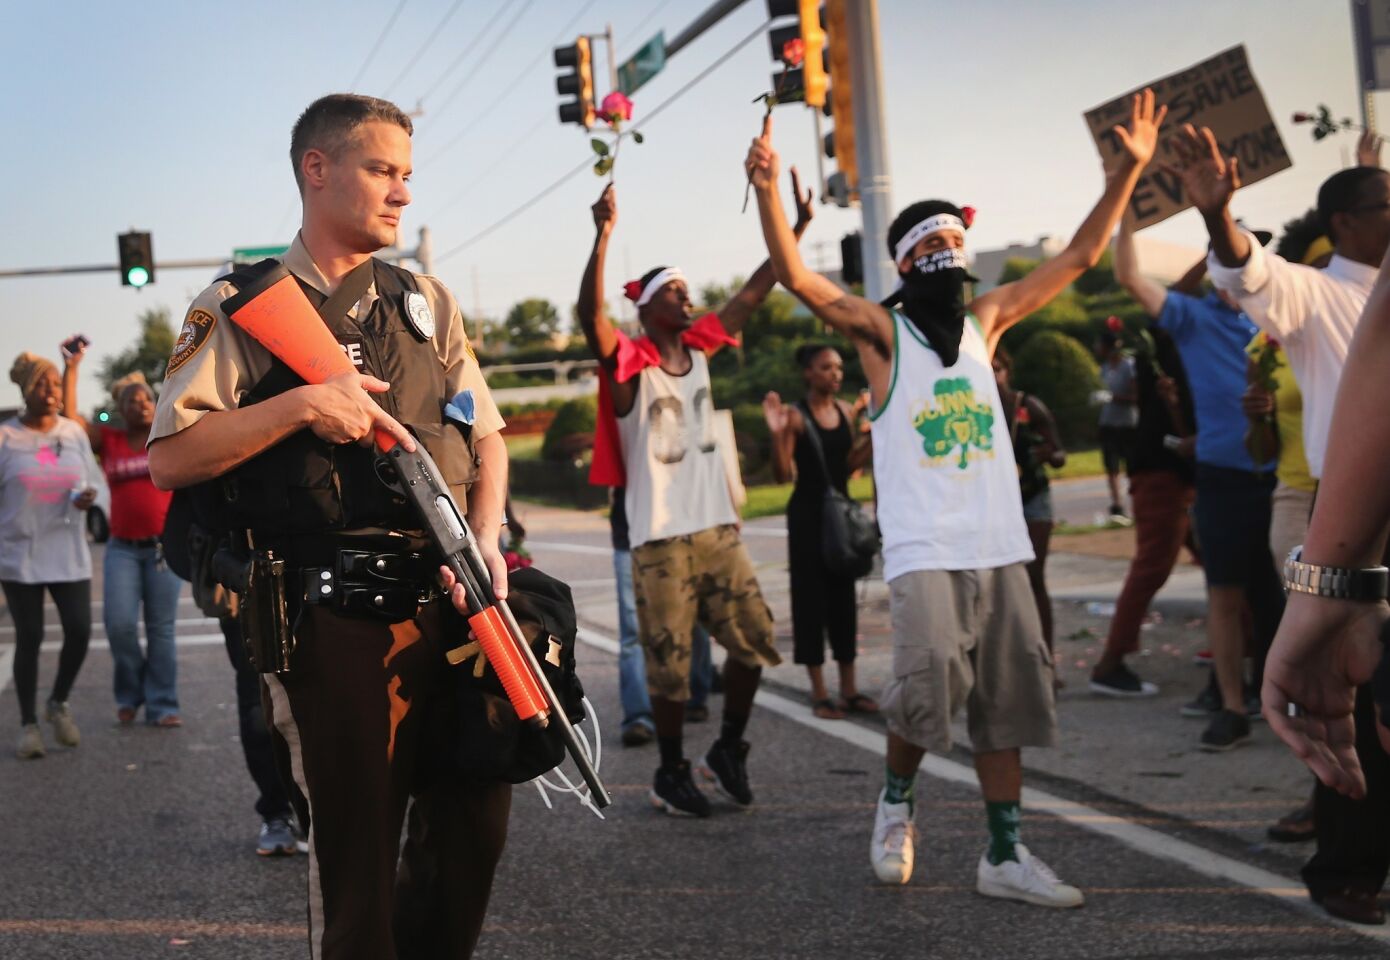 A policeman stands by as demonstrators march in Ferguson on behalf of Michael Brown.